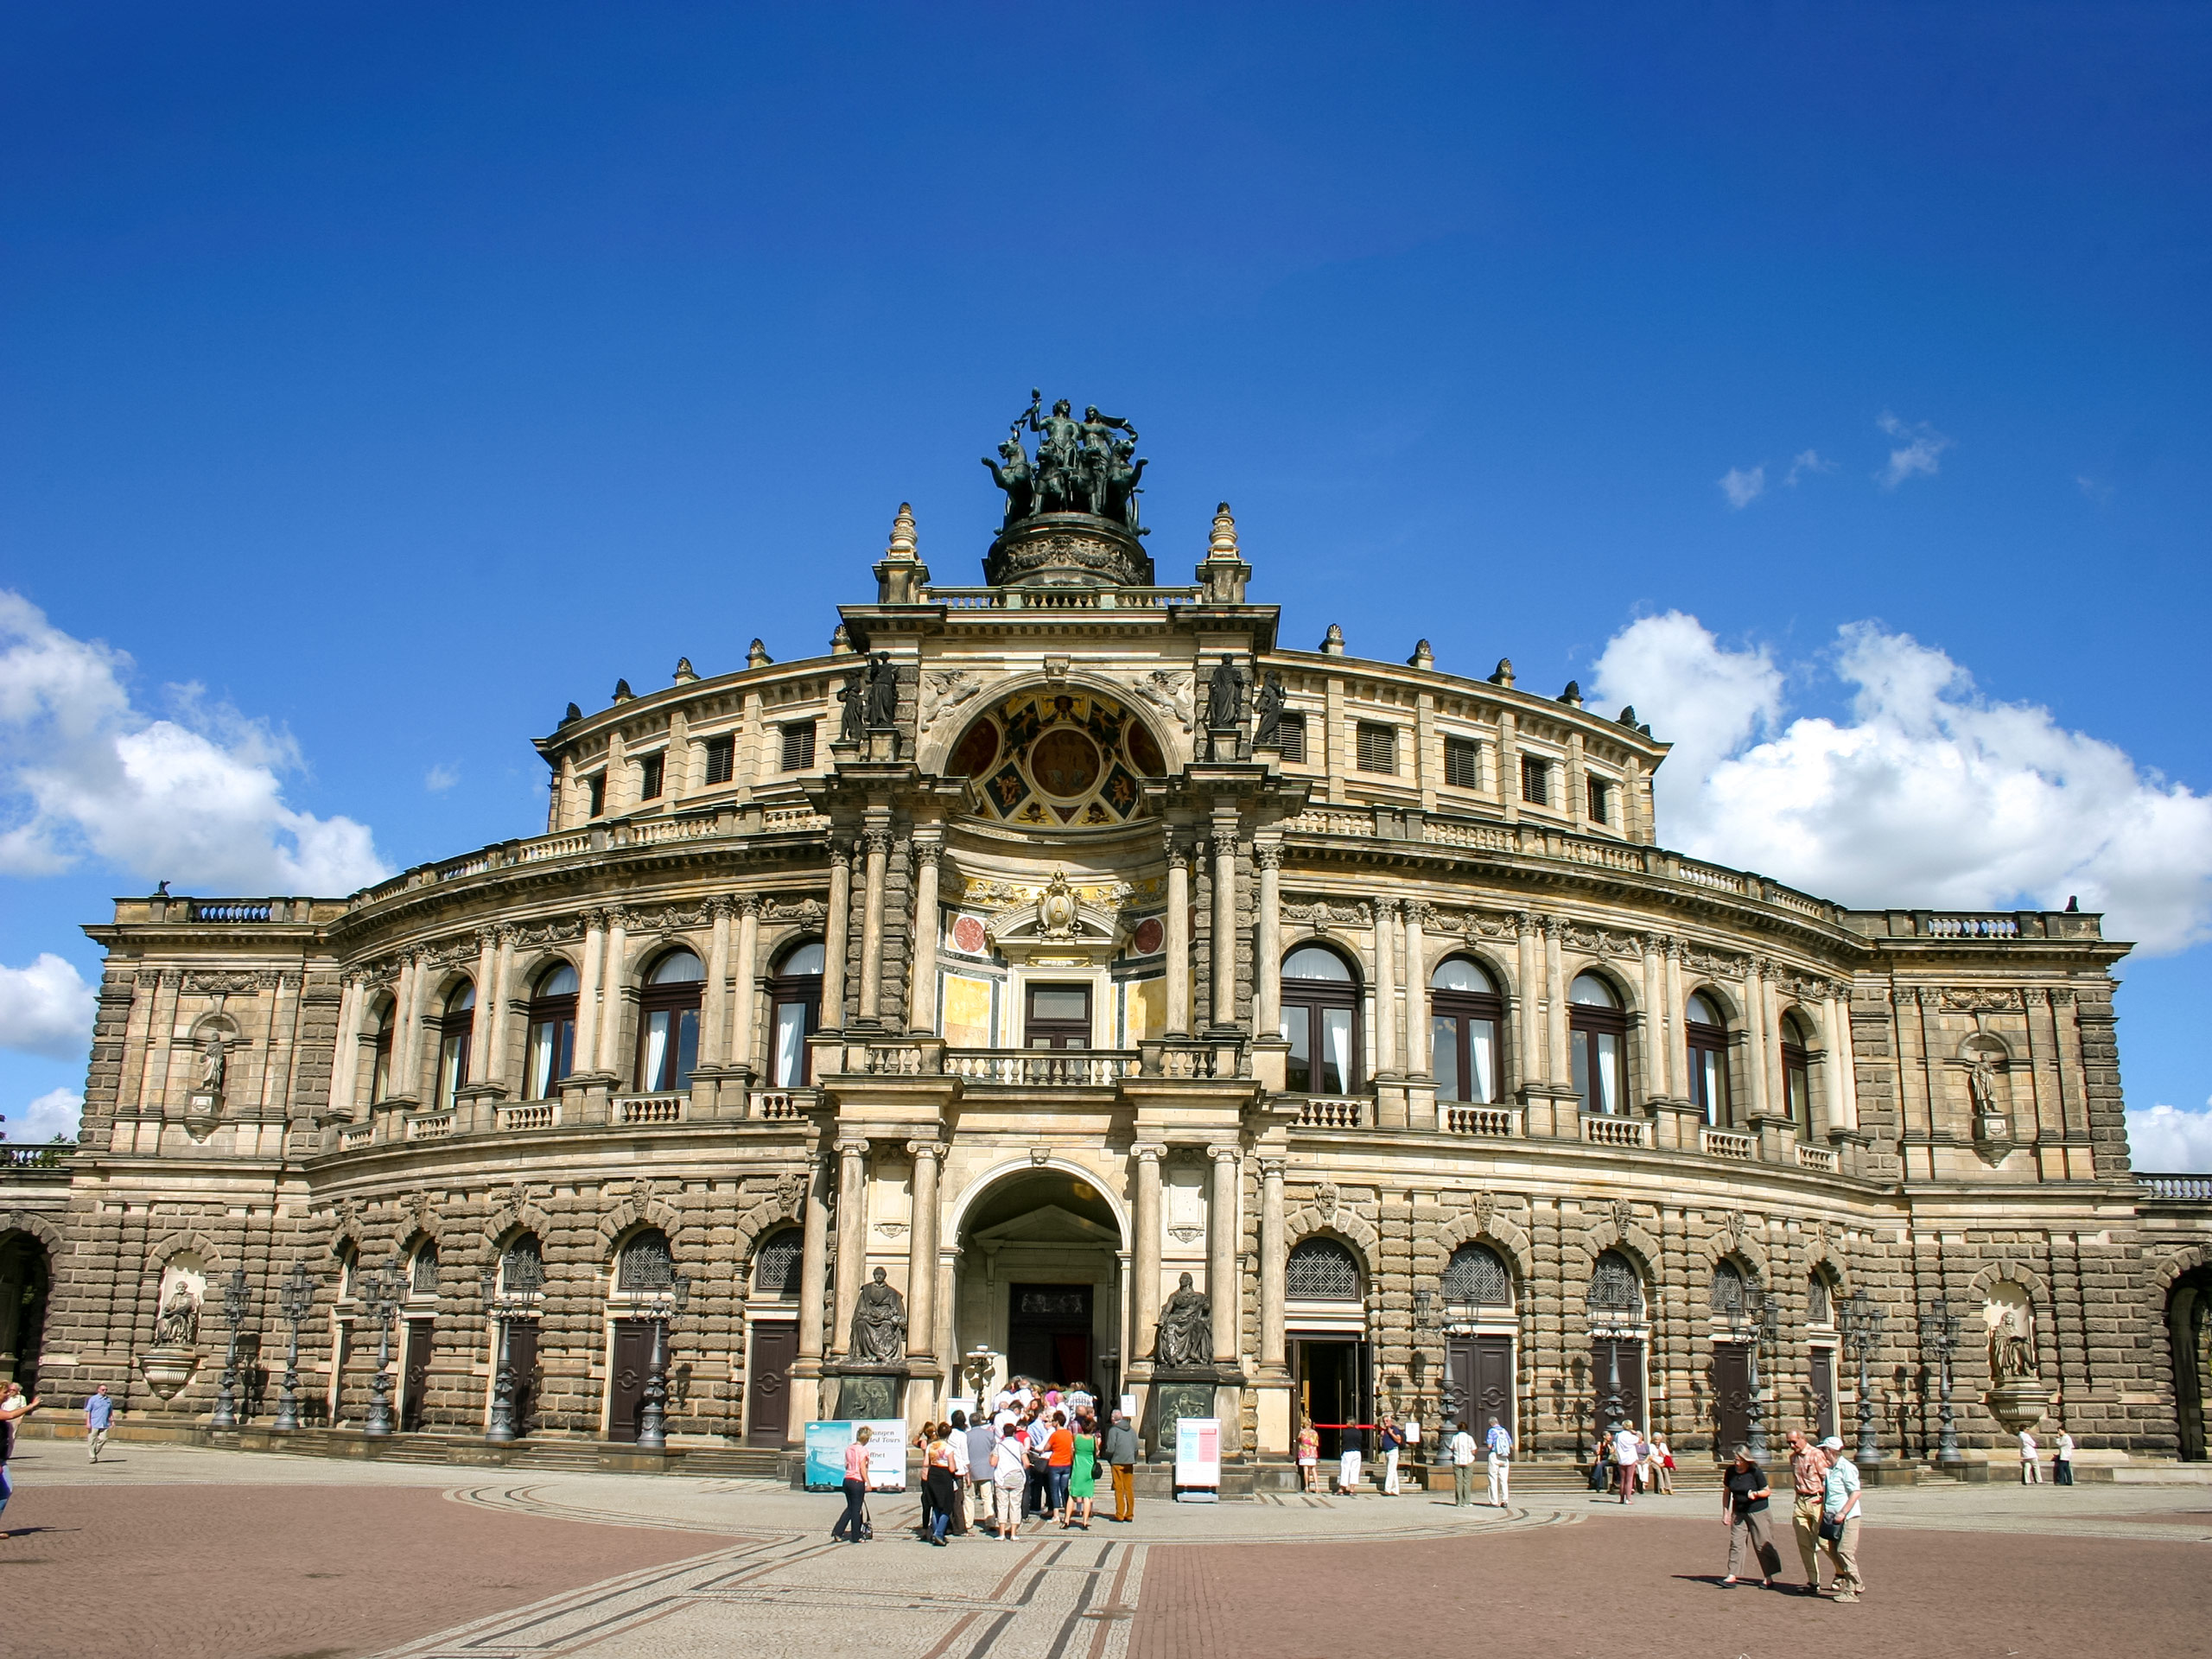 During your bike tours along the Elbe you will visit world famous sights such as the Dresden Semperoper